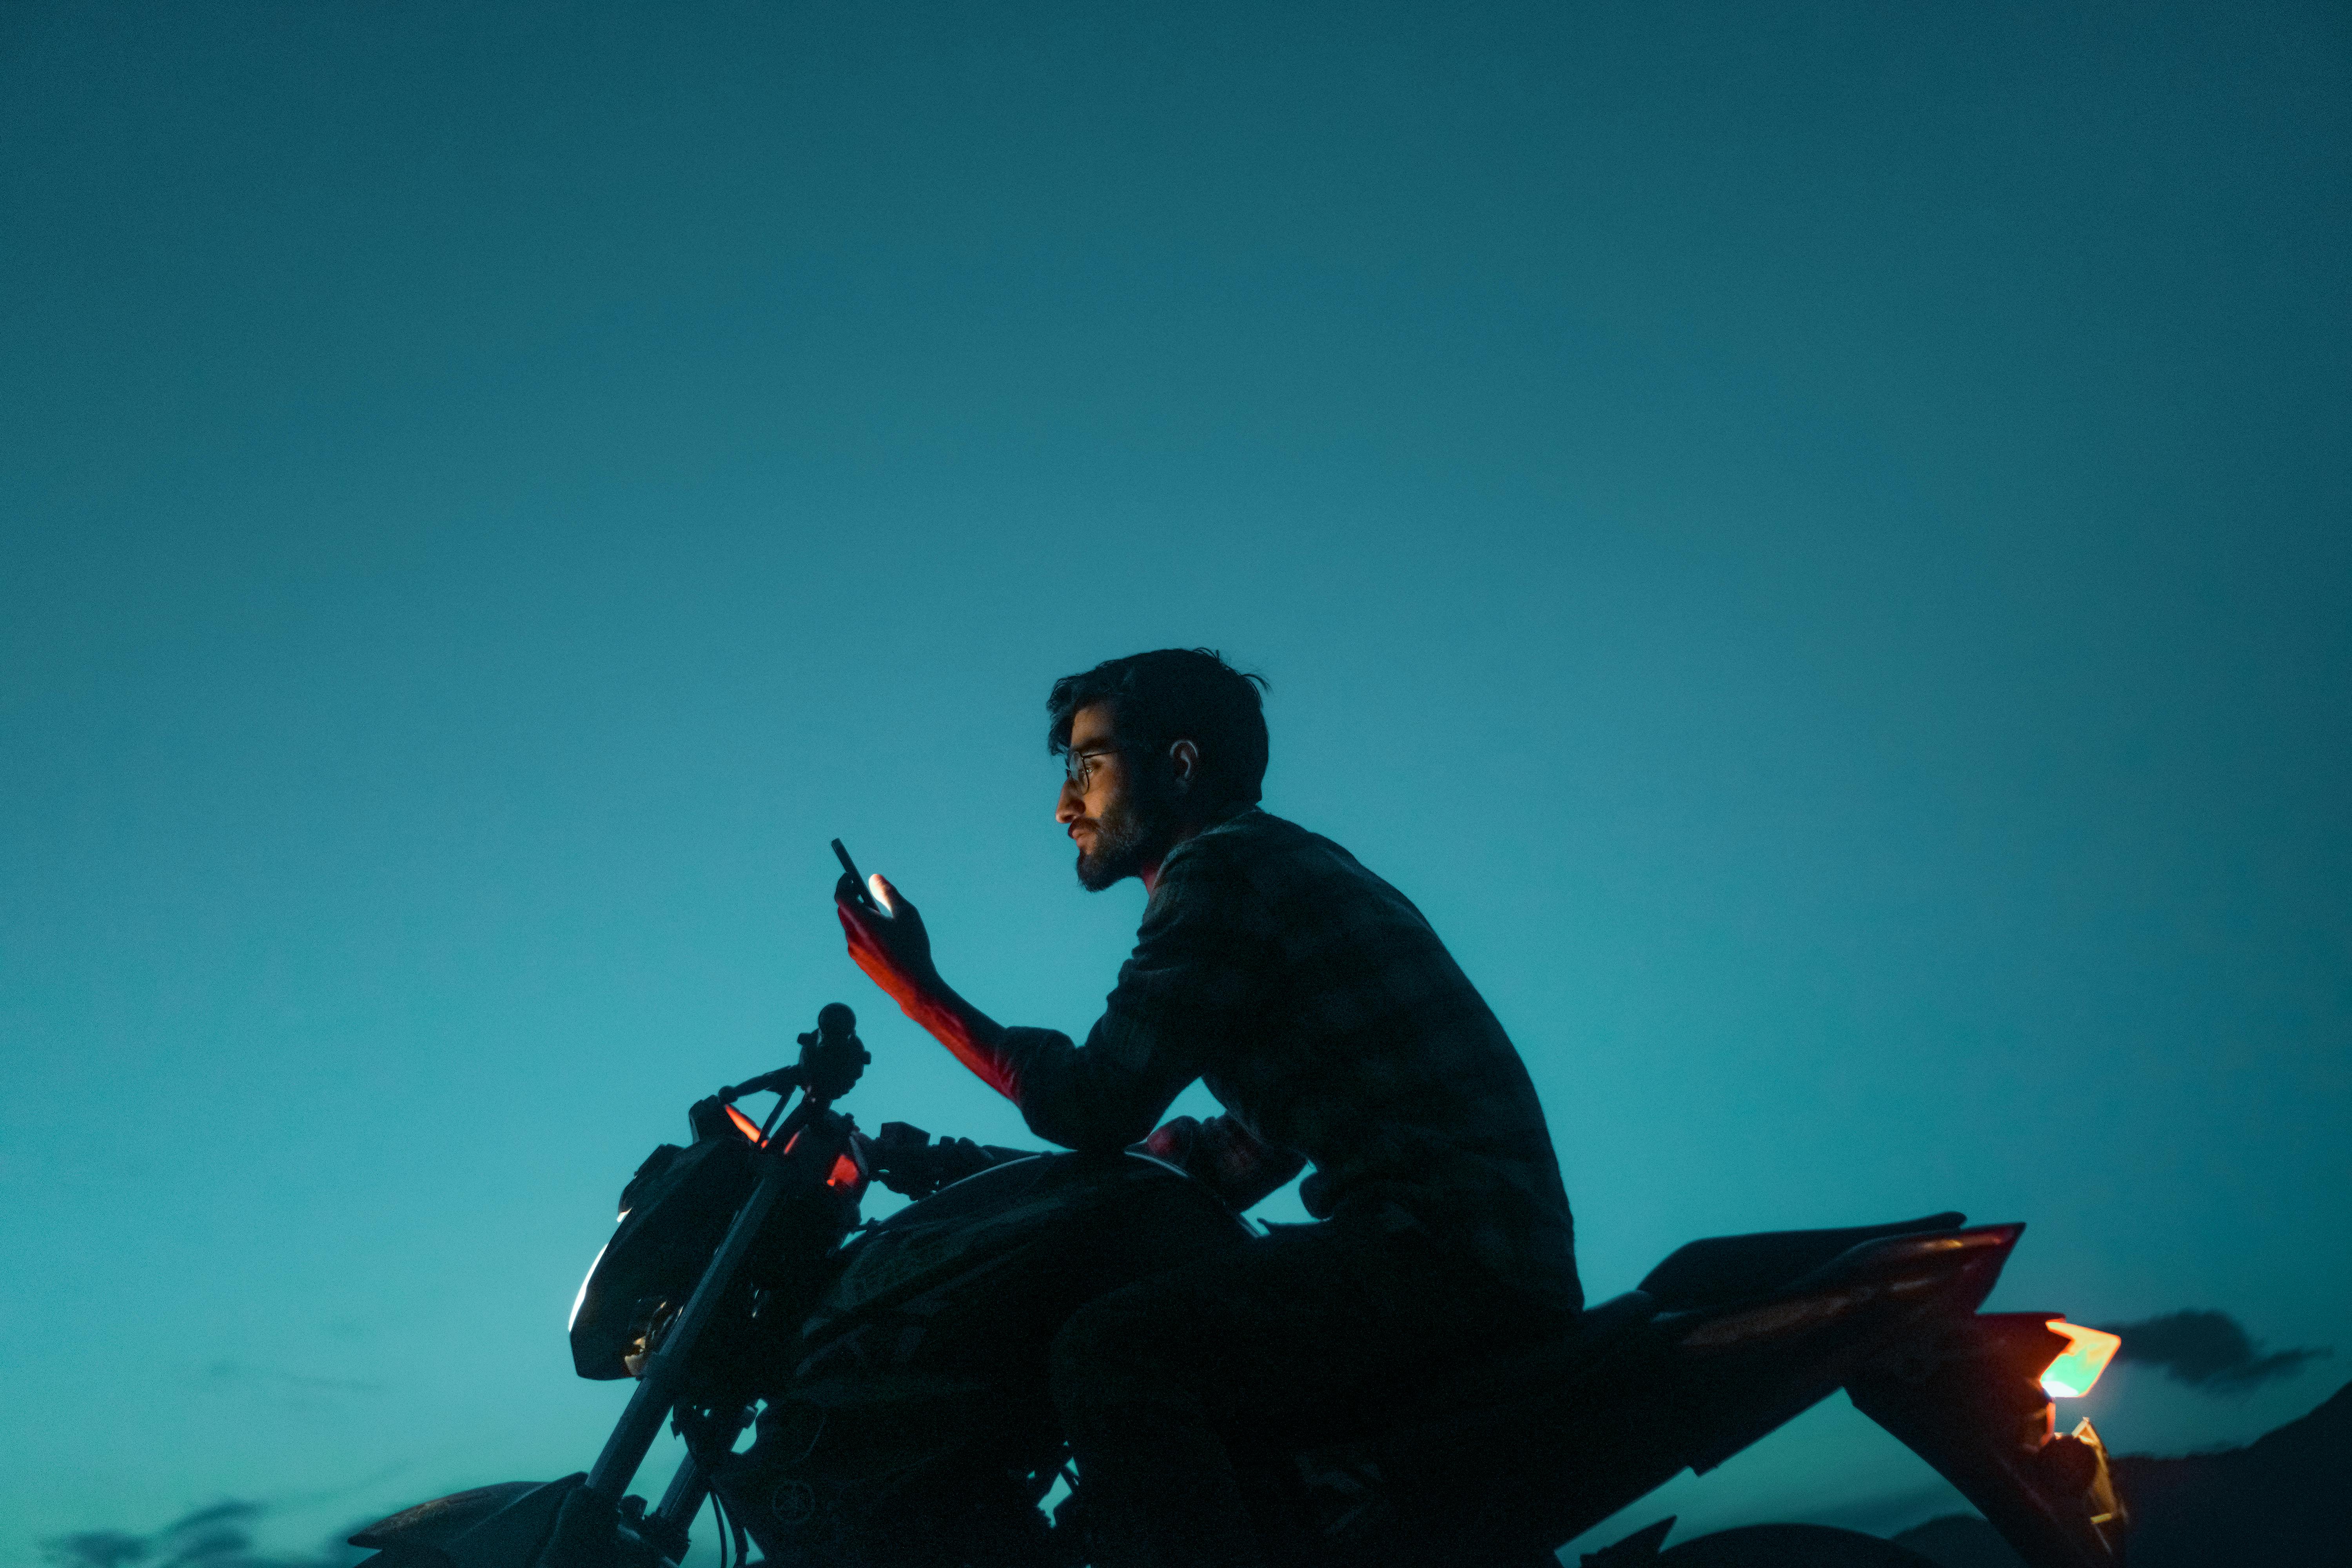 free photo of man on a motorcycle setting up navigation on the smartphone